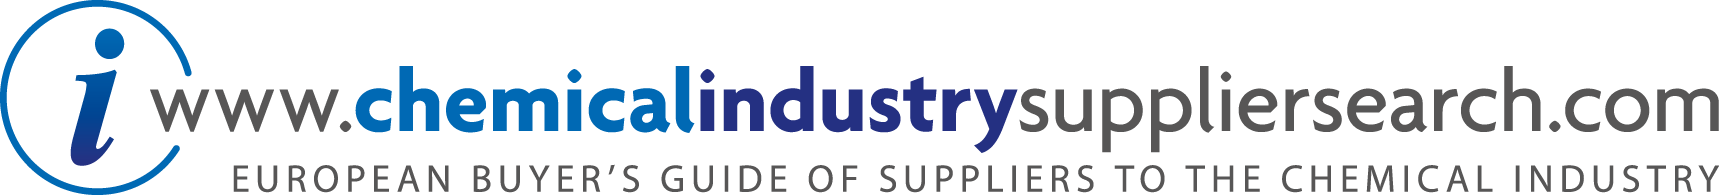 Chemical Industry Supplier Search logo